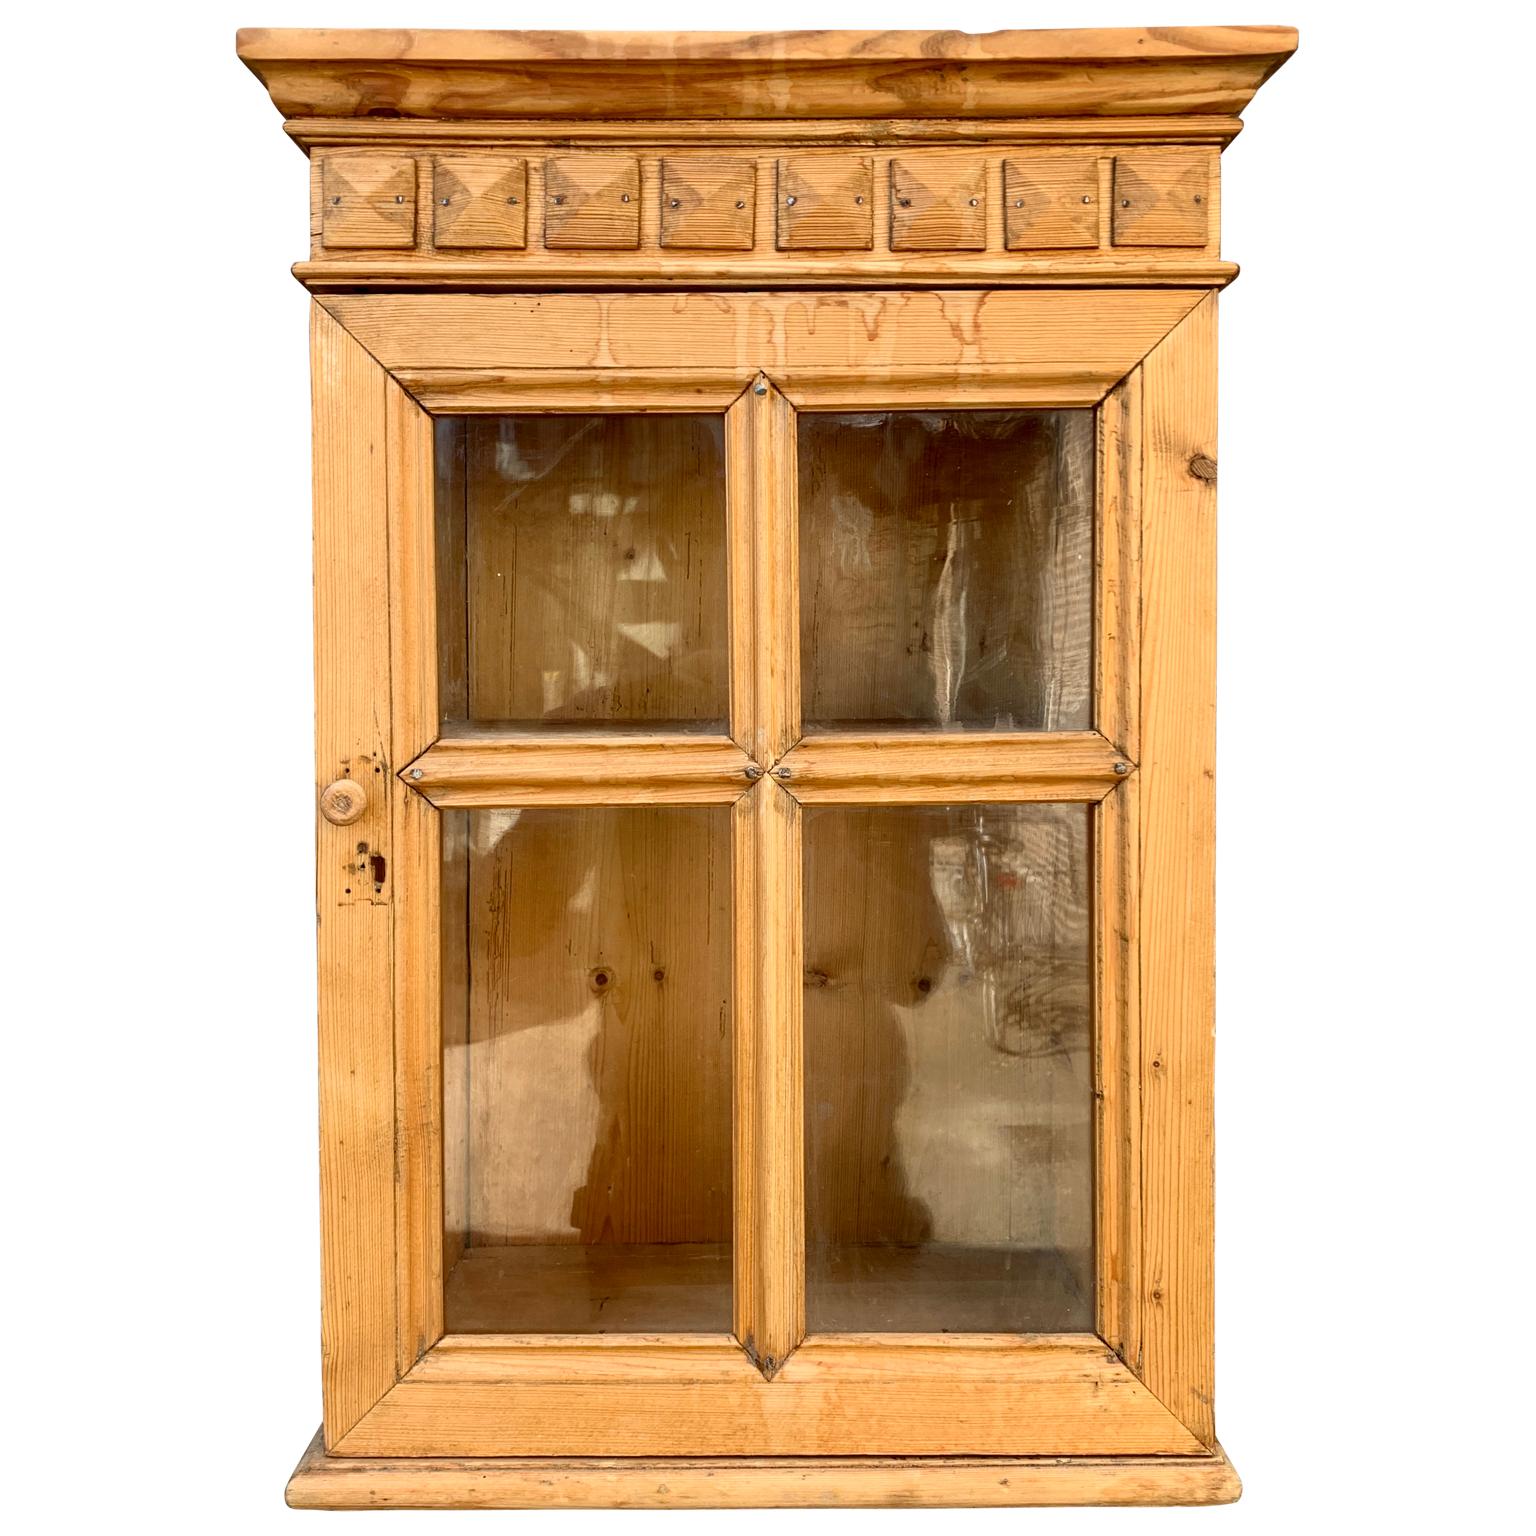 A Swedish country folk art hanging cabinet in pine with 4 panel glass door with antique glass.